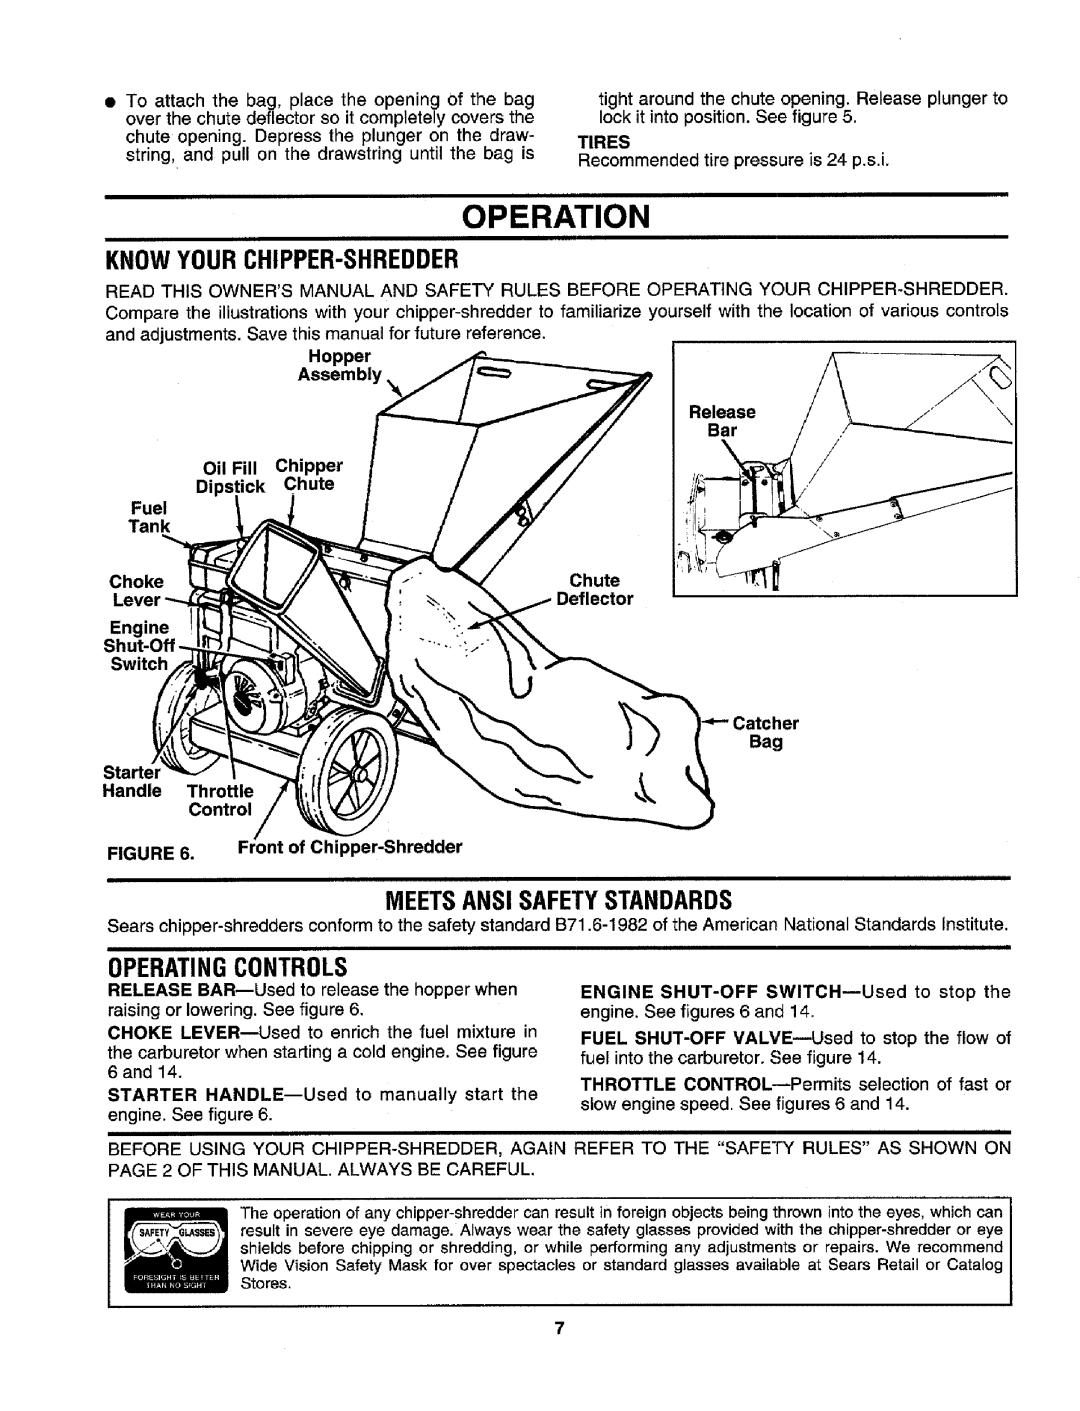 Craftsman 247.795950 Operation, Know Your Chipper-Shredder, Meets Ansi Safety Standards, lockit intopositionSeefigure5 